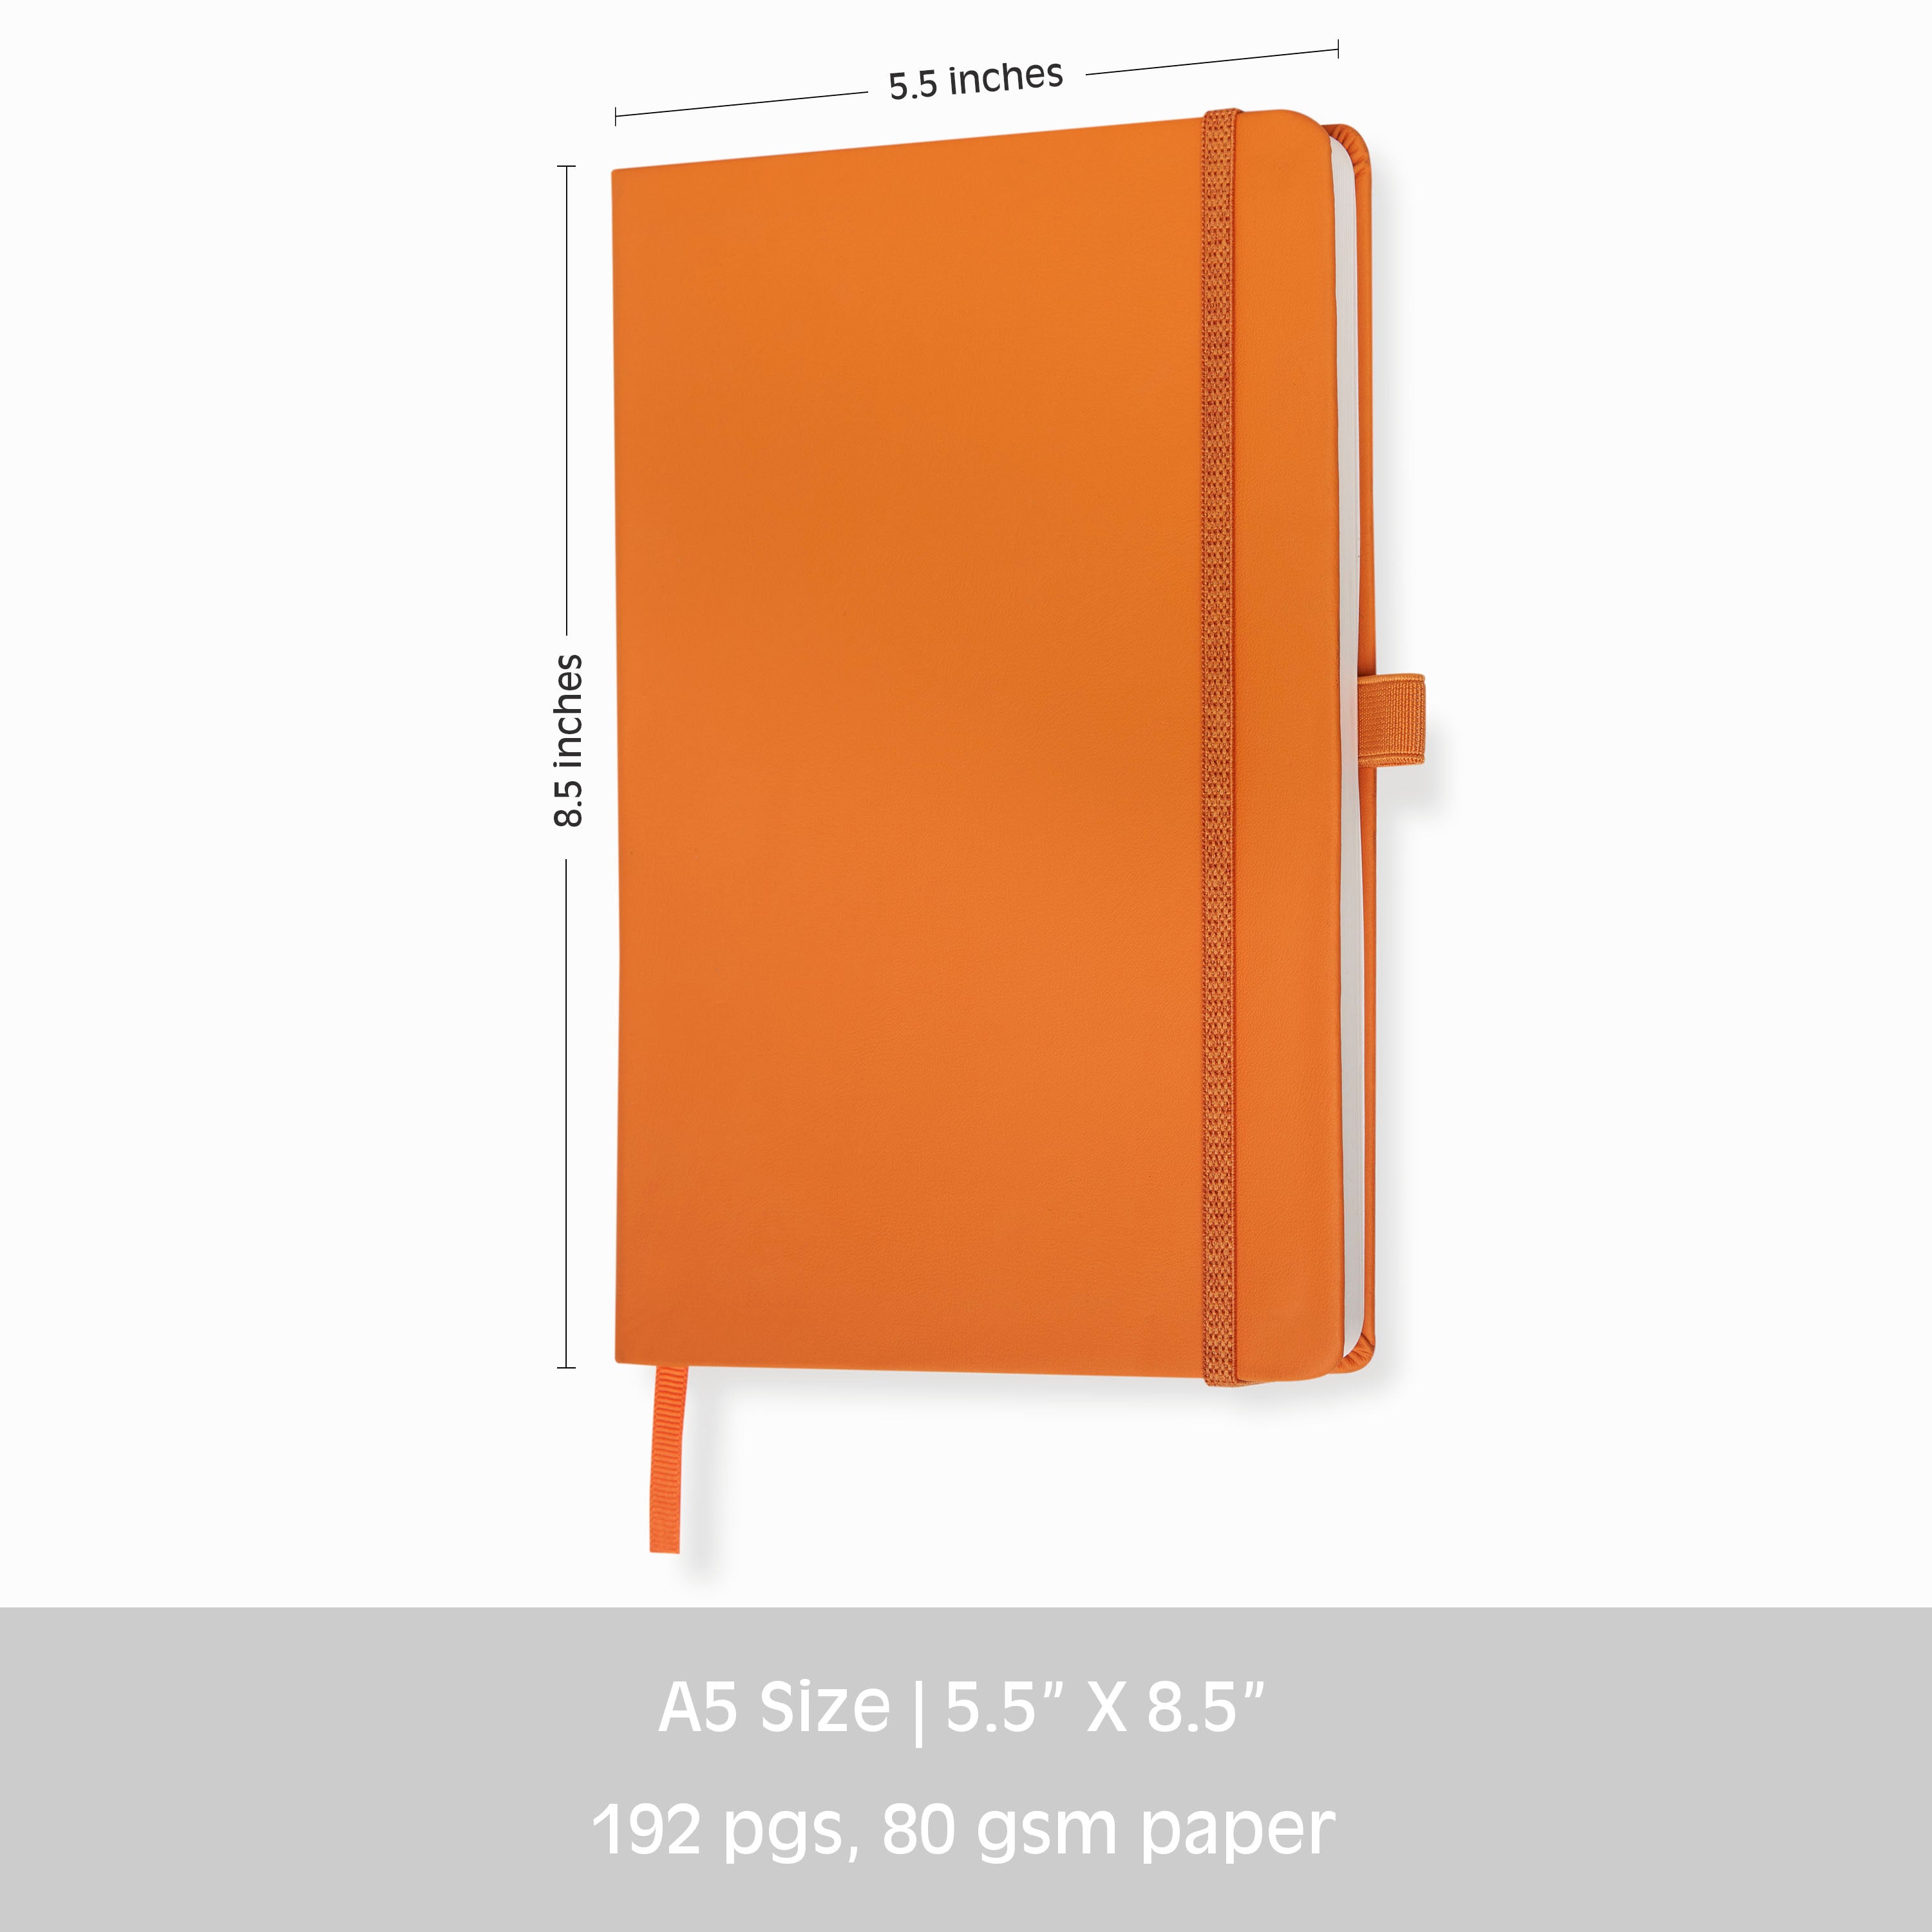 Pro Series Executive A5 PU Leather Hardbound Ruled Diary with Pen Loop - ORANGE